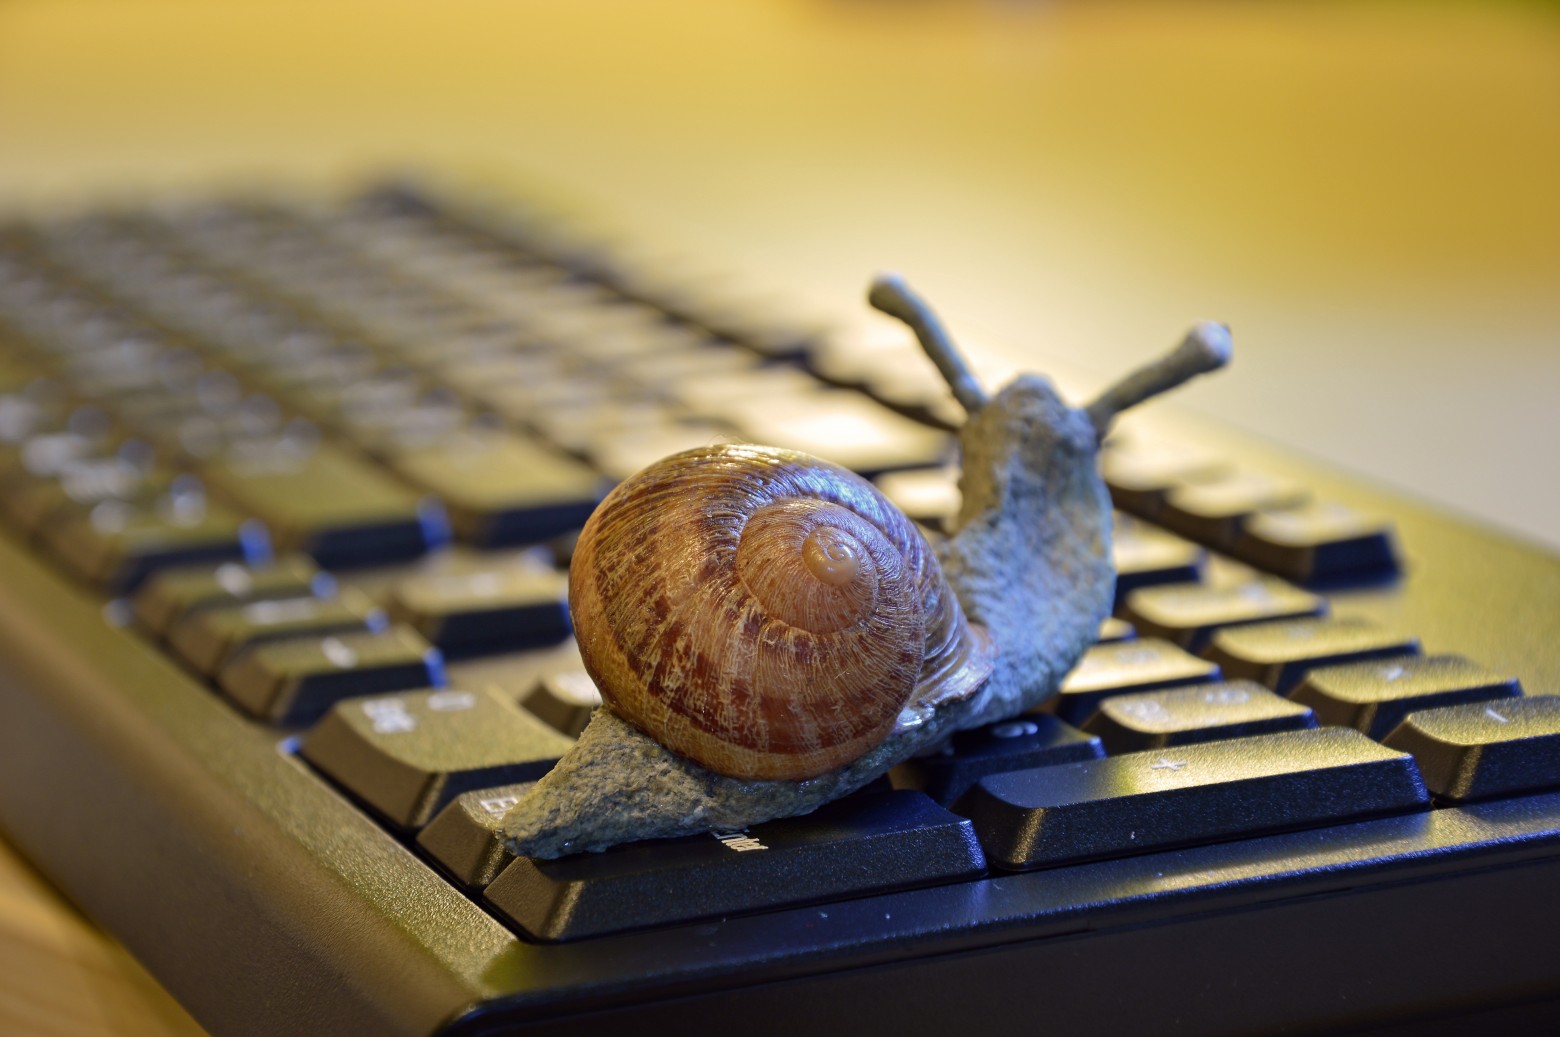 SIGNS OF “SNAIL” EMPLOYEES